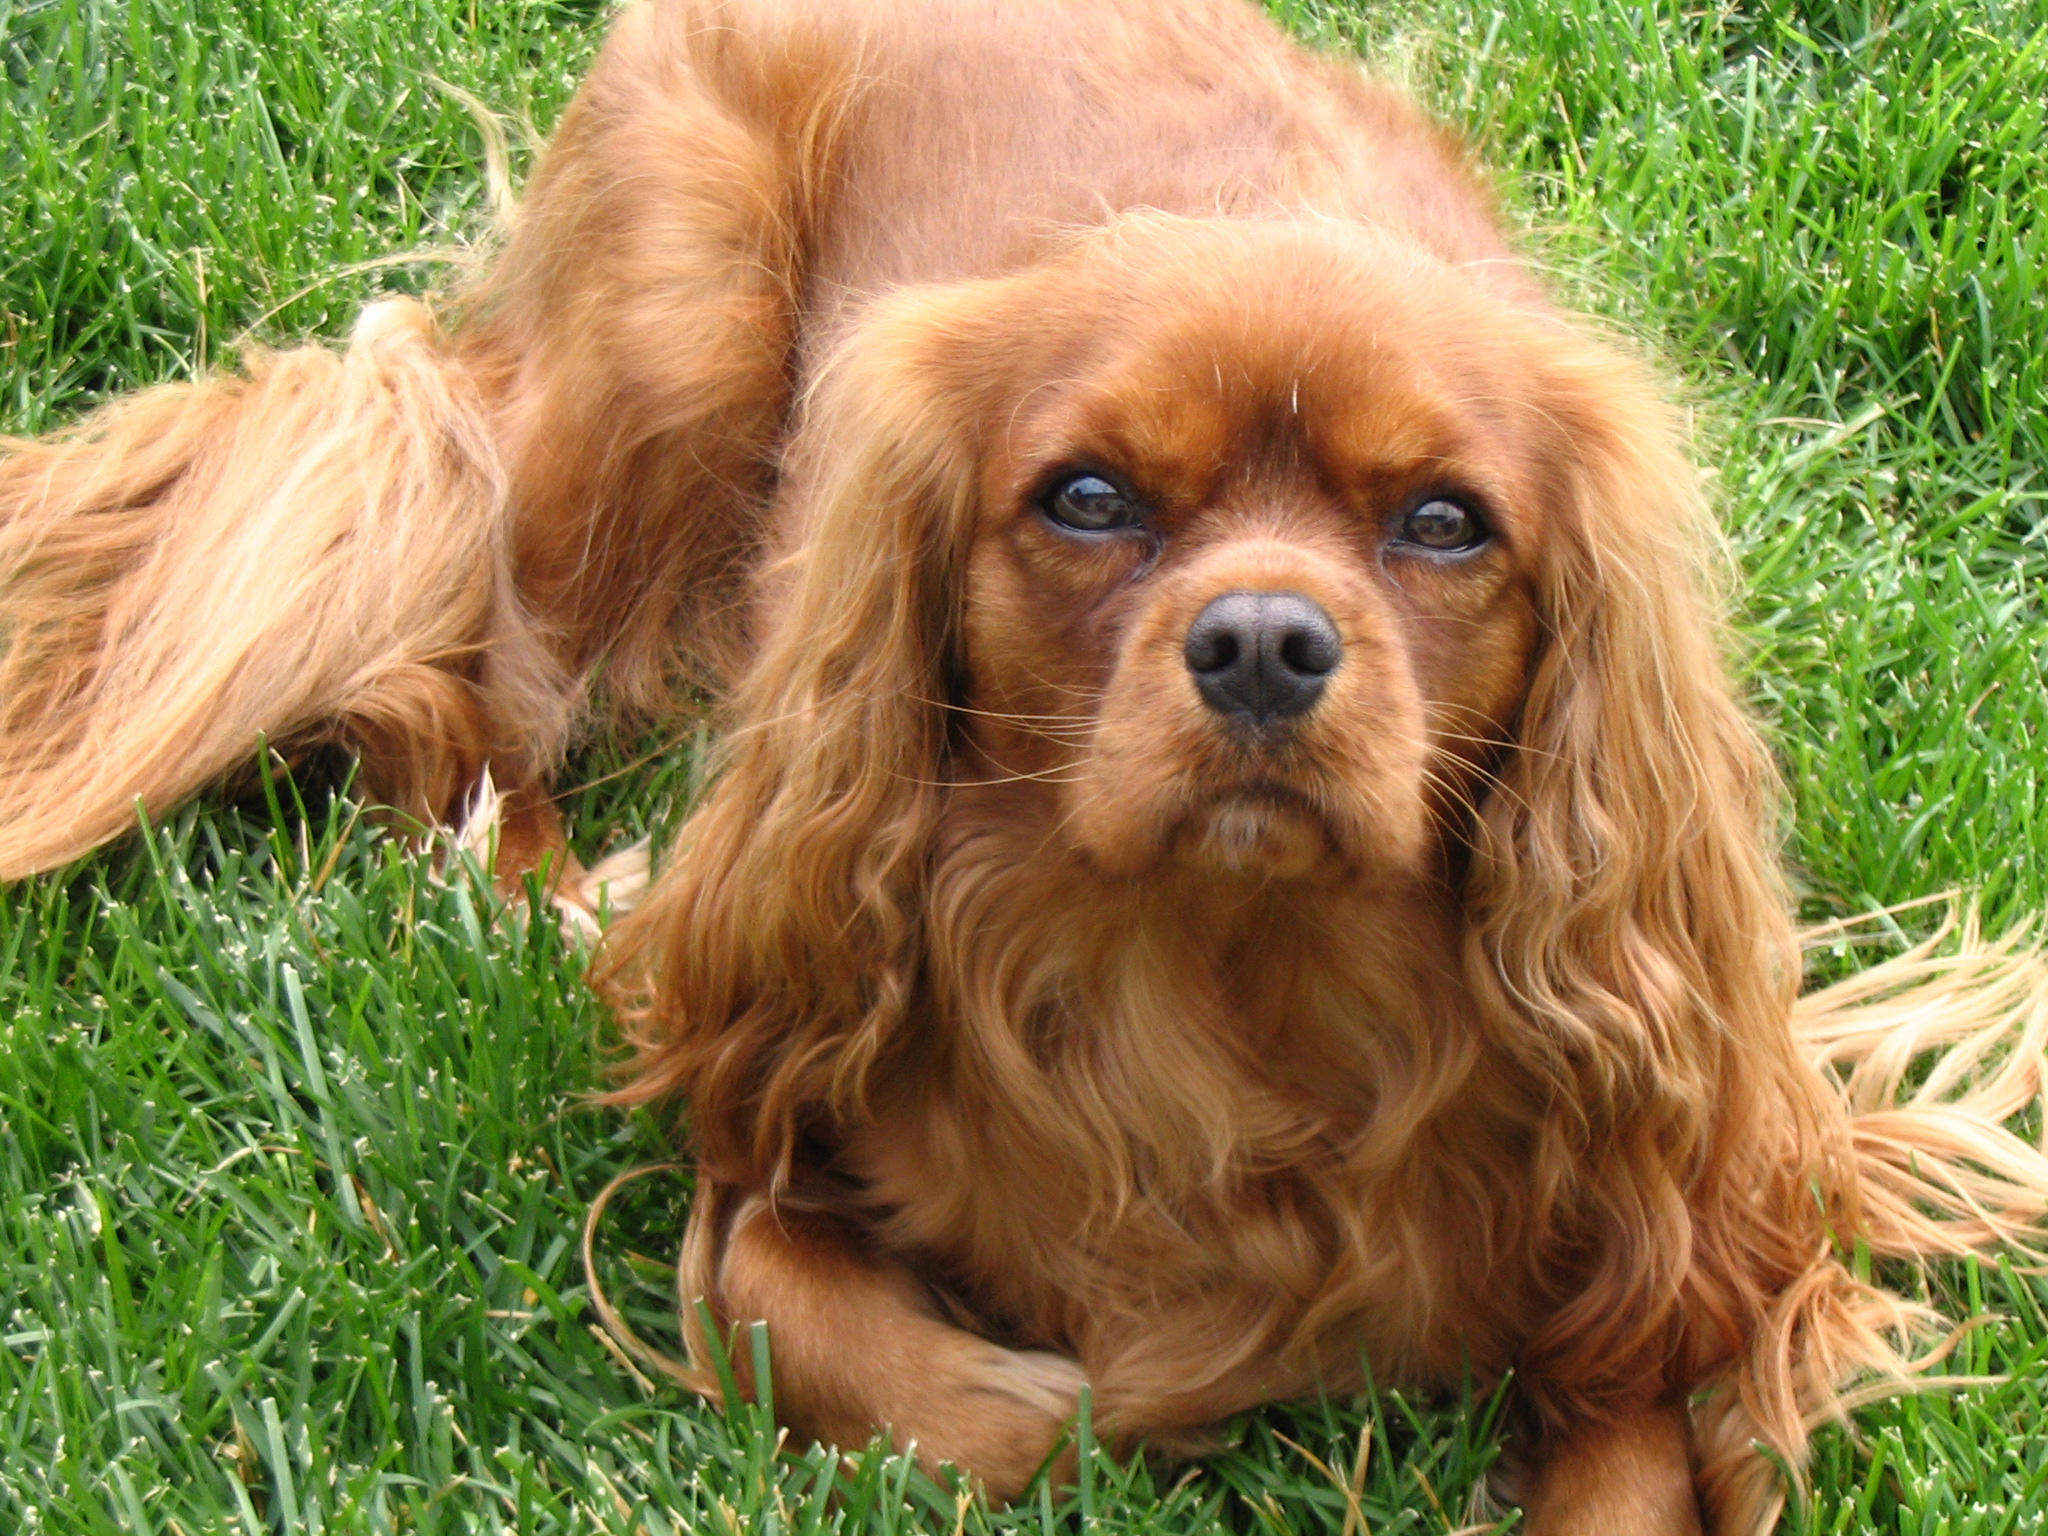 Cavalier King Charles Spaniel Facts To Know Before Getting One